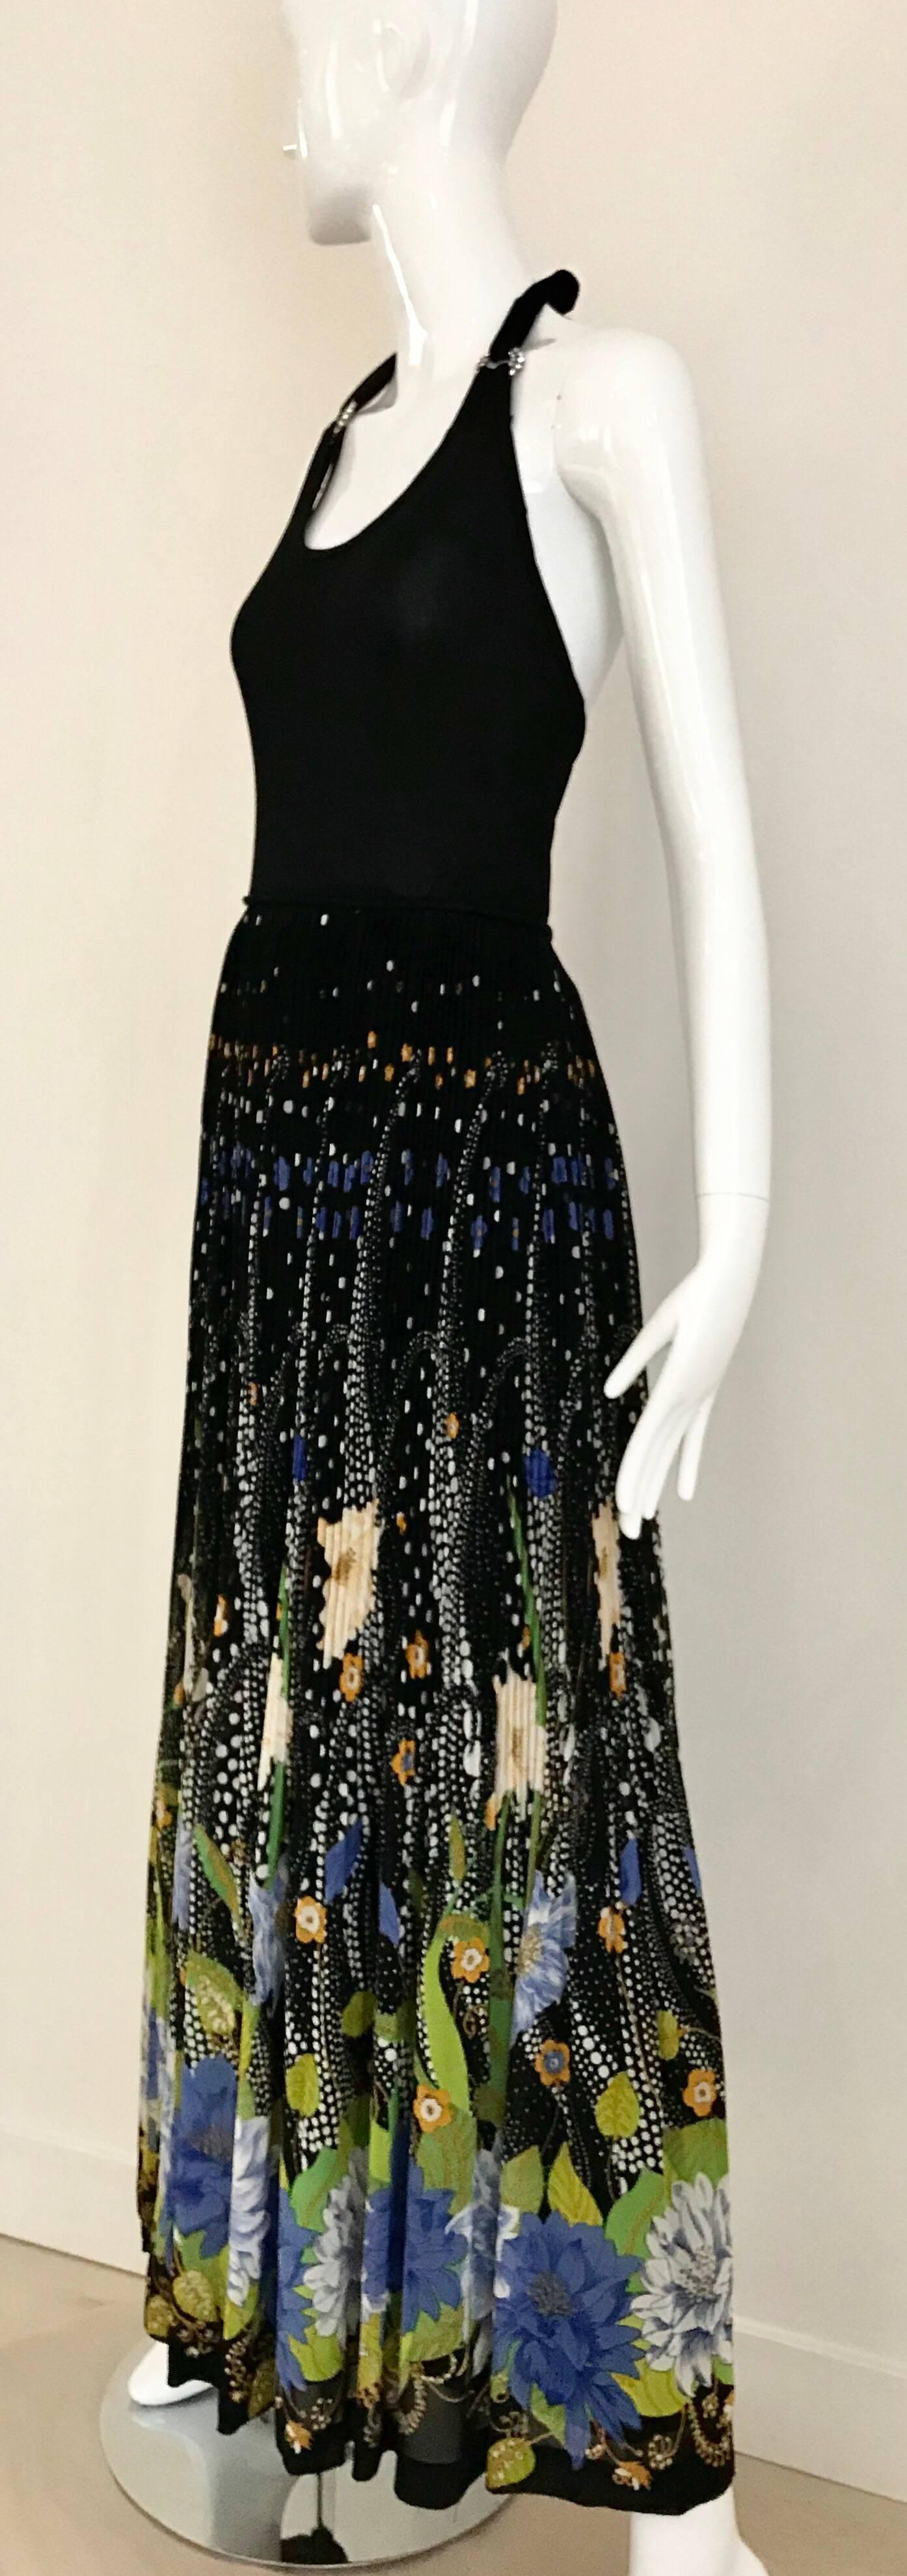 Sexy Black Halter Knit Dress with two buckle rhinestones. Multi color floral print in silk pleated skirt. Zip at the back.  Size 4- Small
Excellent condition

**** This Garment has been professionally Dry Cleaned and Ready to wear.
